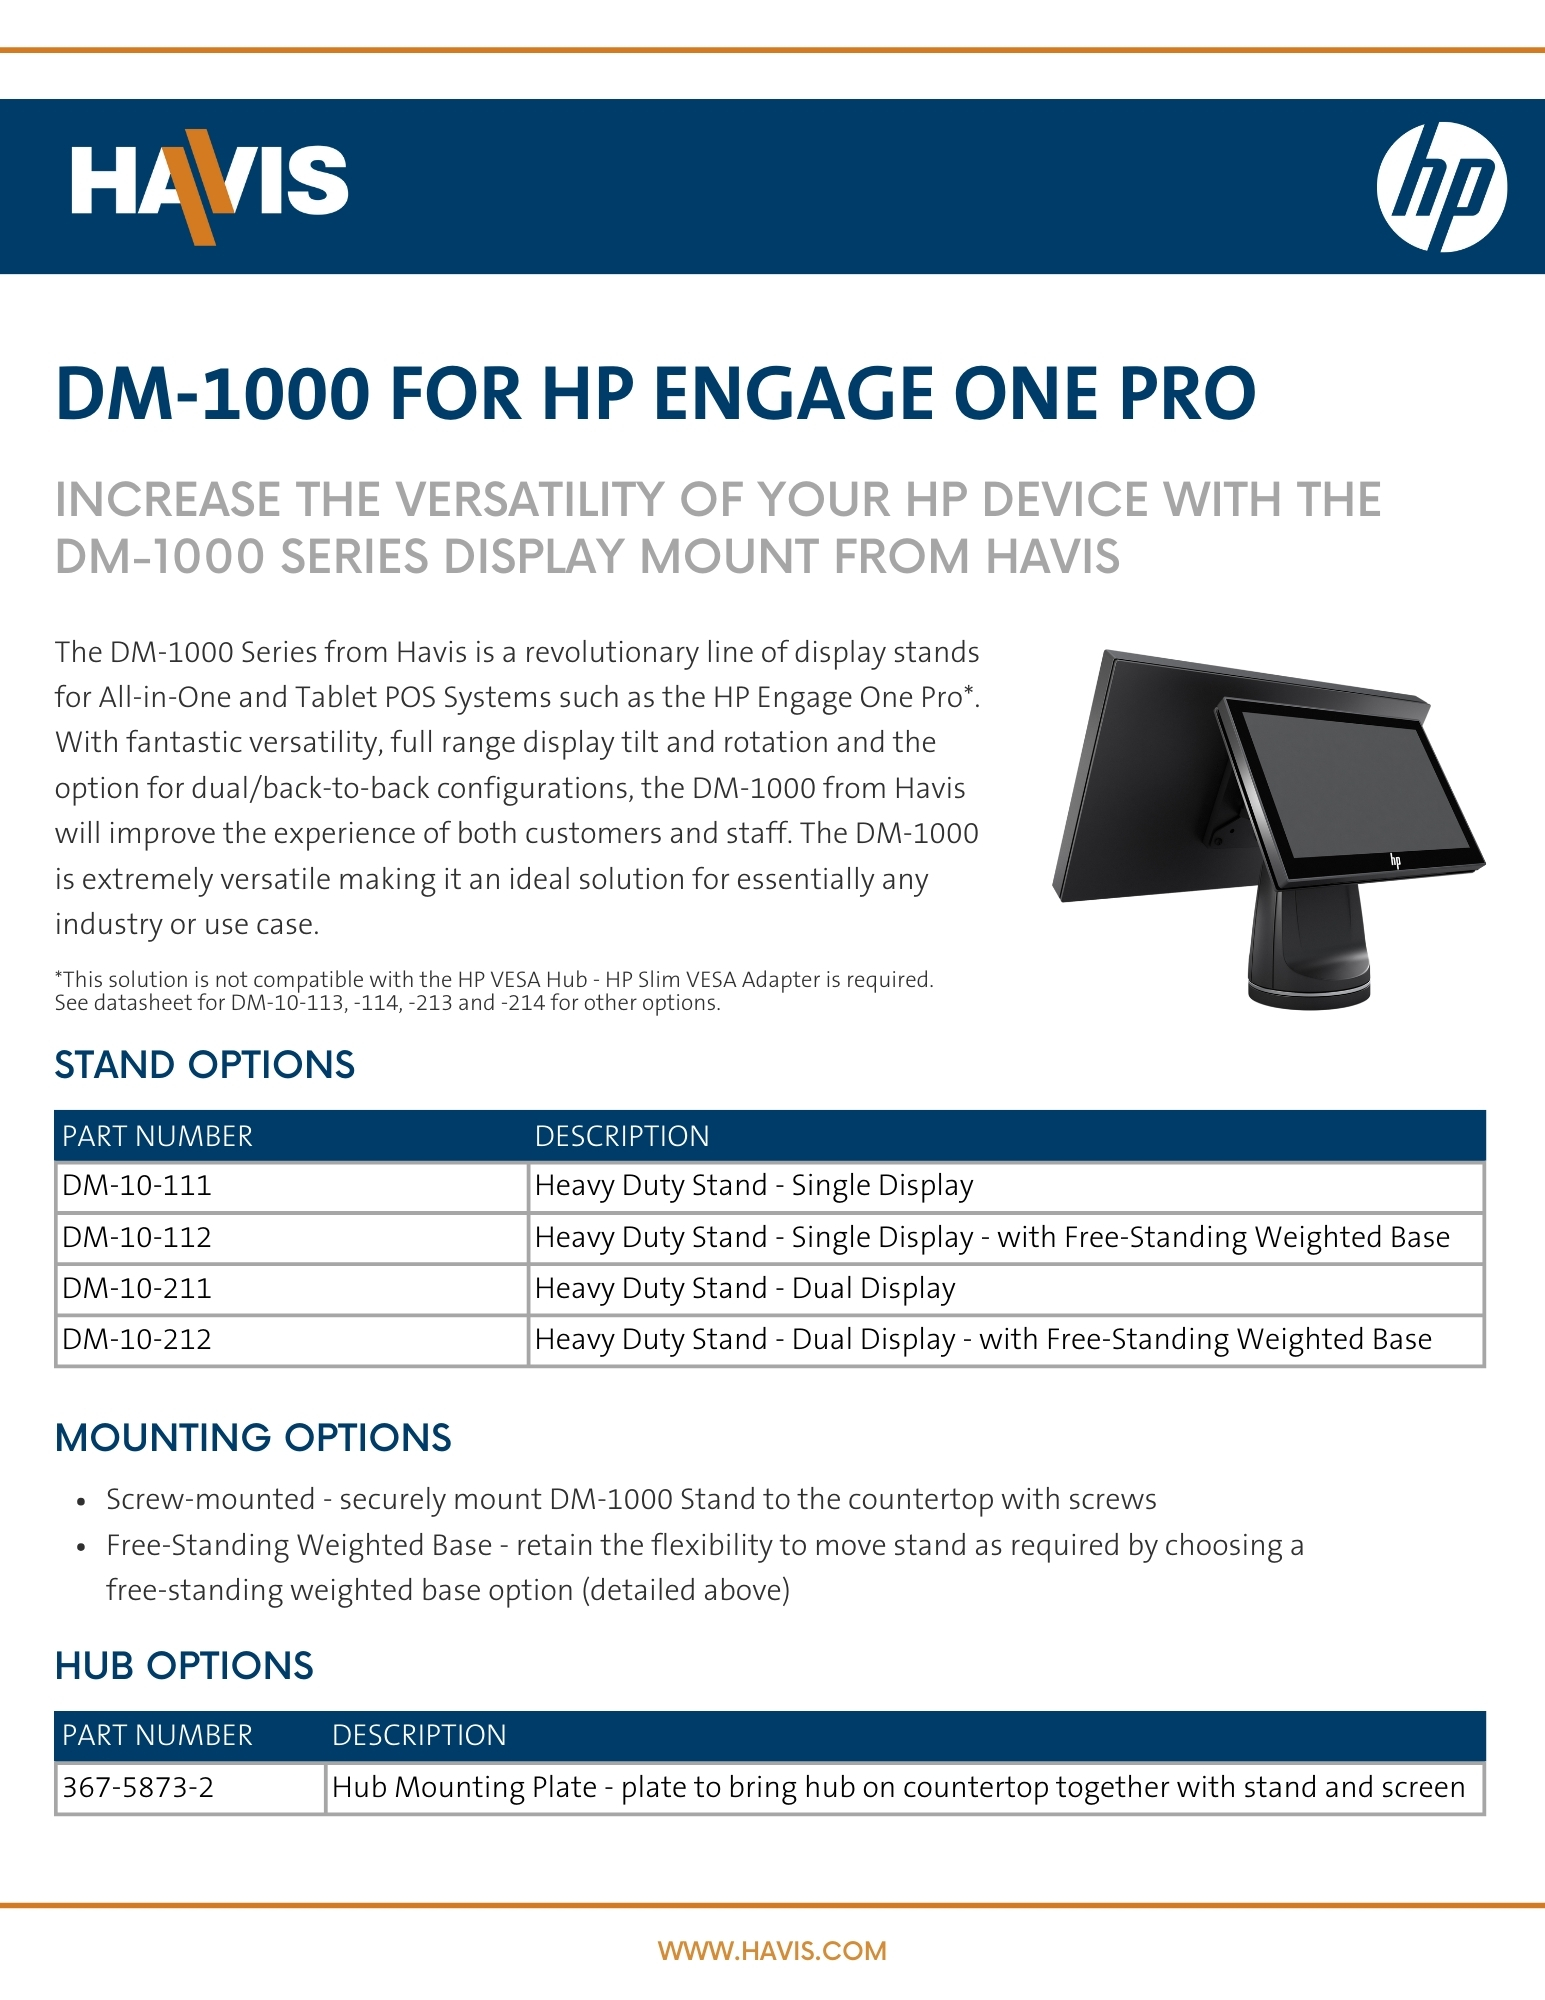 DM-1000 for HP Engage One Pro Bundle - Data Sheet